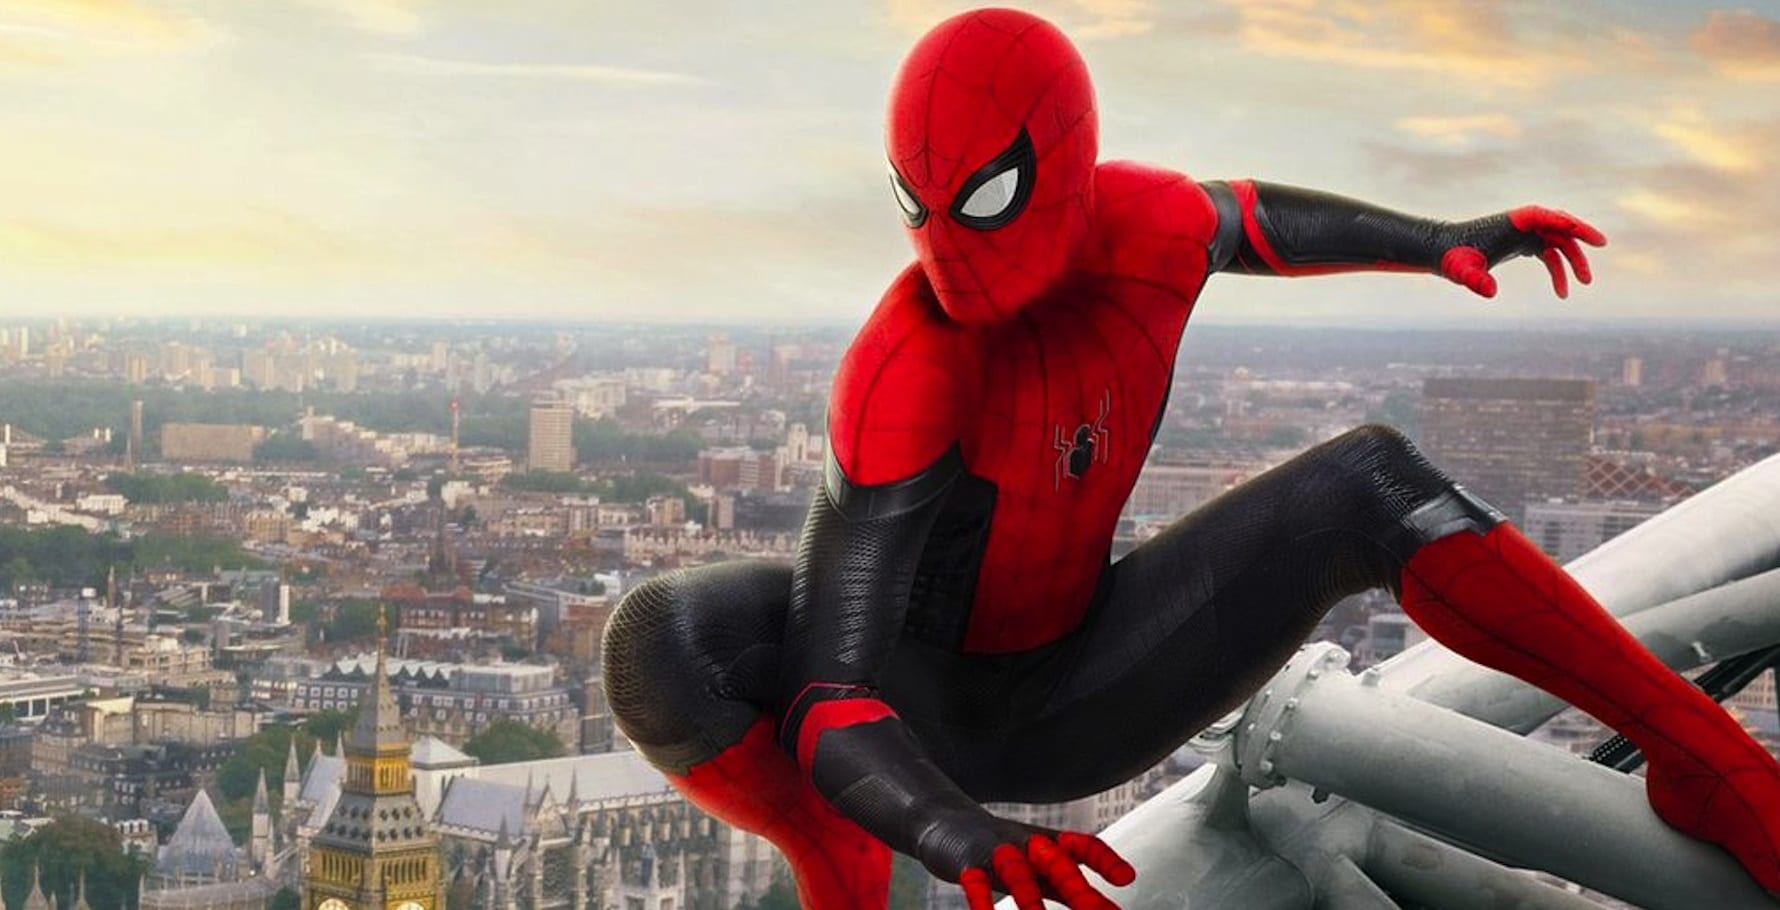 Spider-Man Returns Home to the Marvel Cinematic Universe